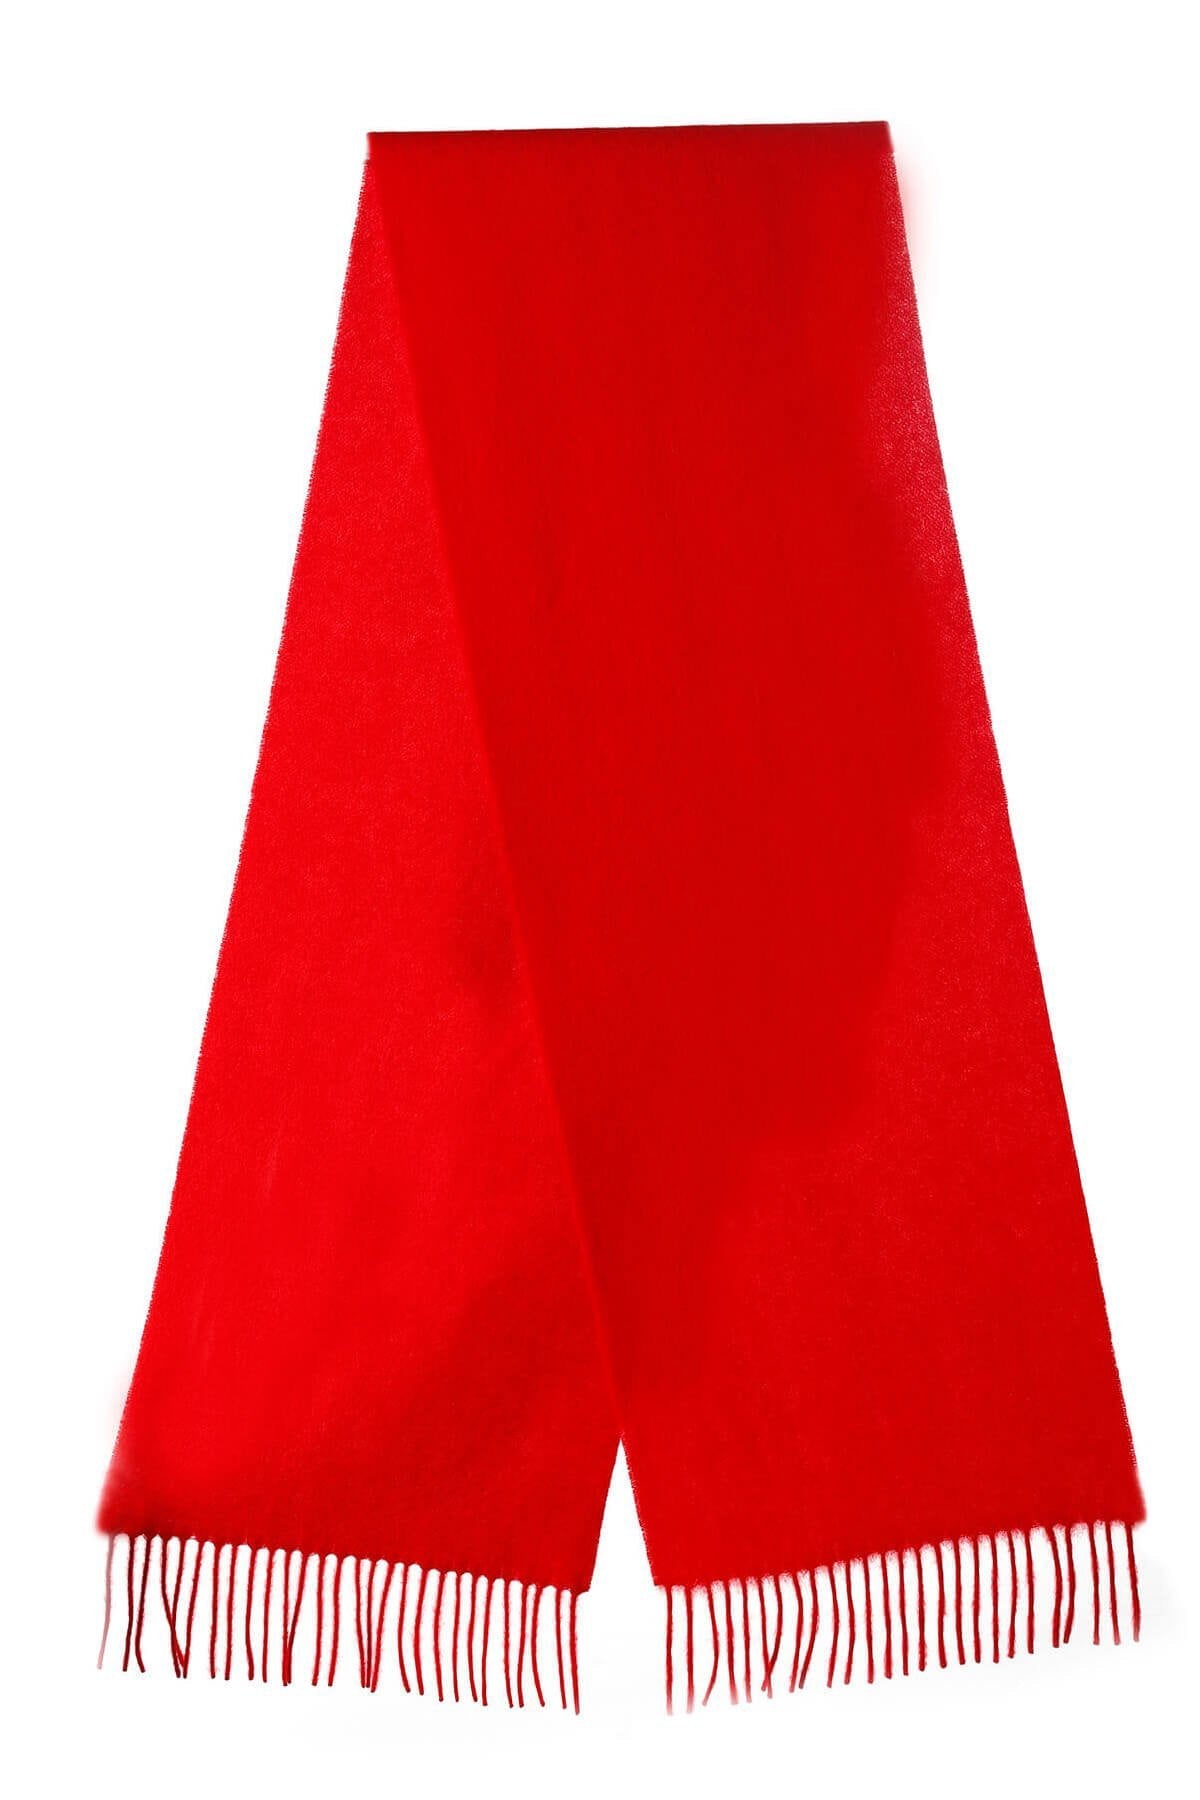 Plain Red Scarf 100% Pure Cashmere